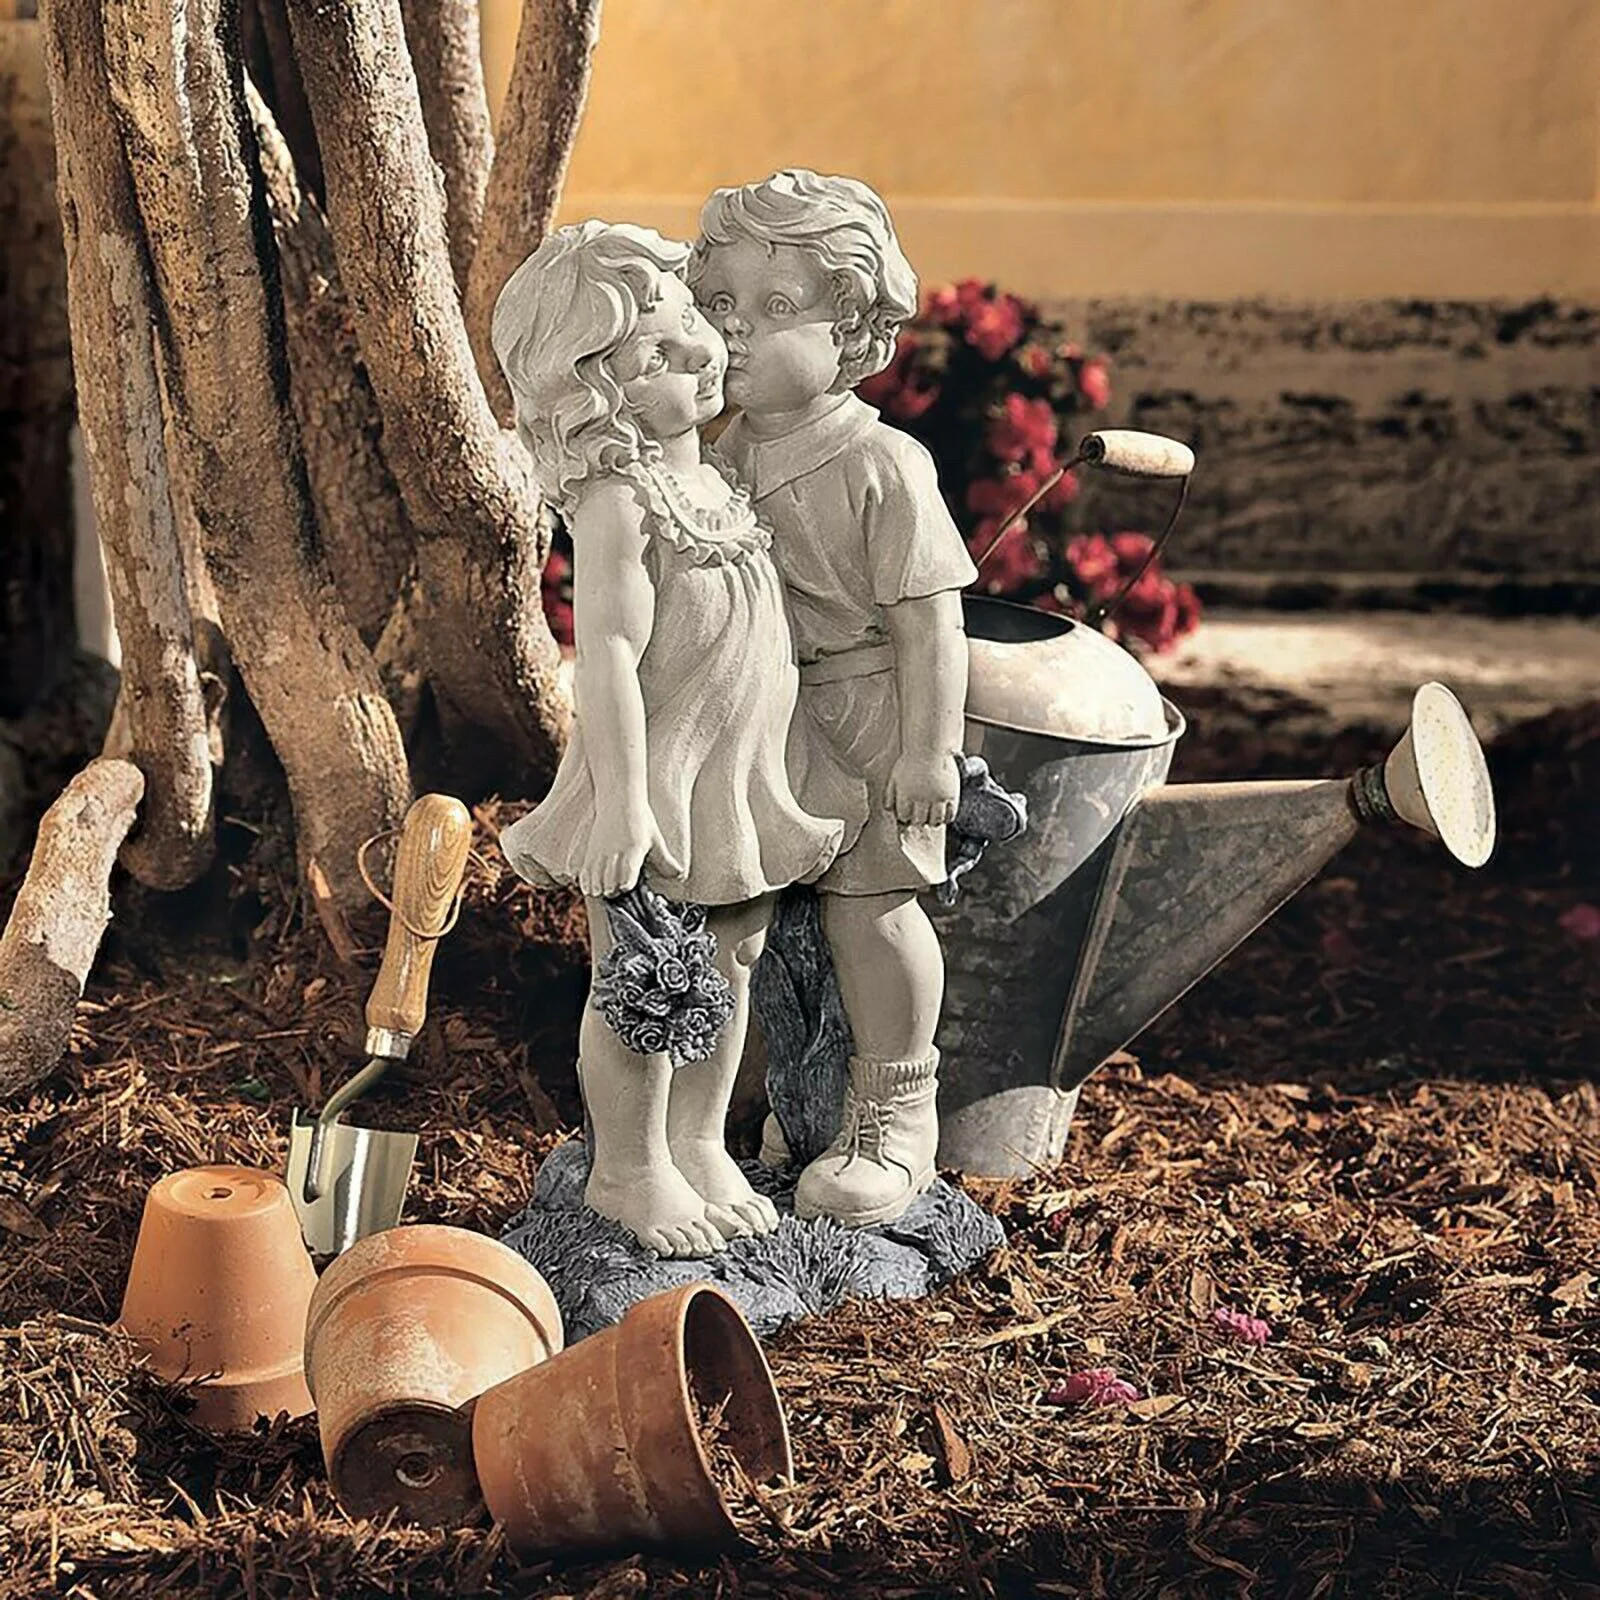 Exquisite Boy and Girl Kissing Statue Resin Crafts Ornament for Home Garden Courtyard Decoration Lawn Art Sculptures images - 6